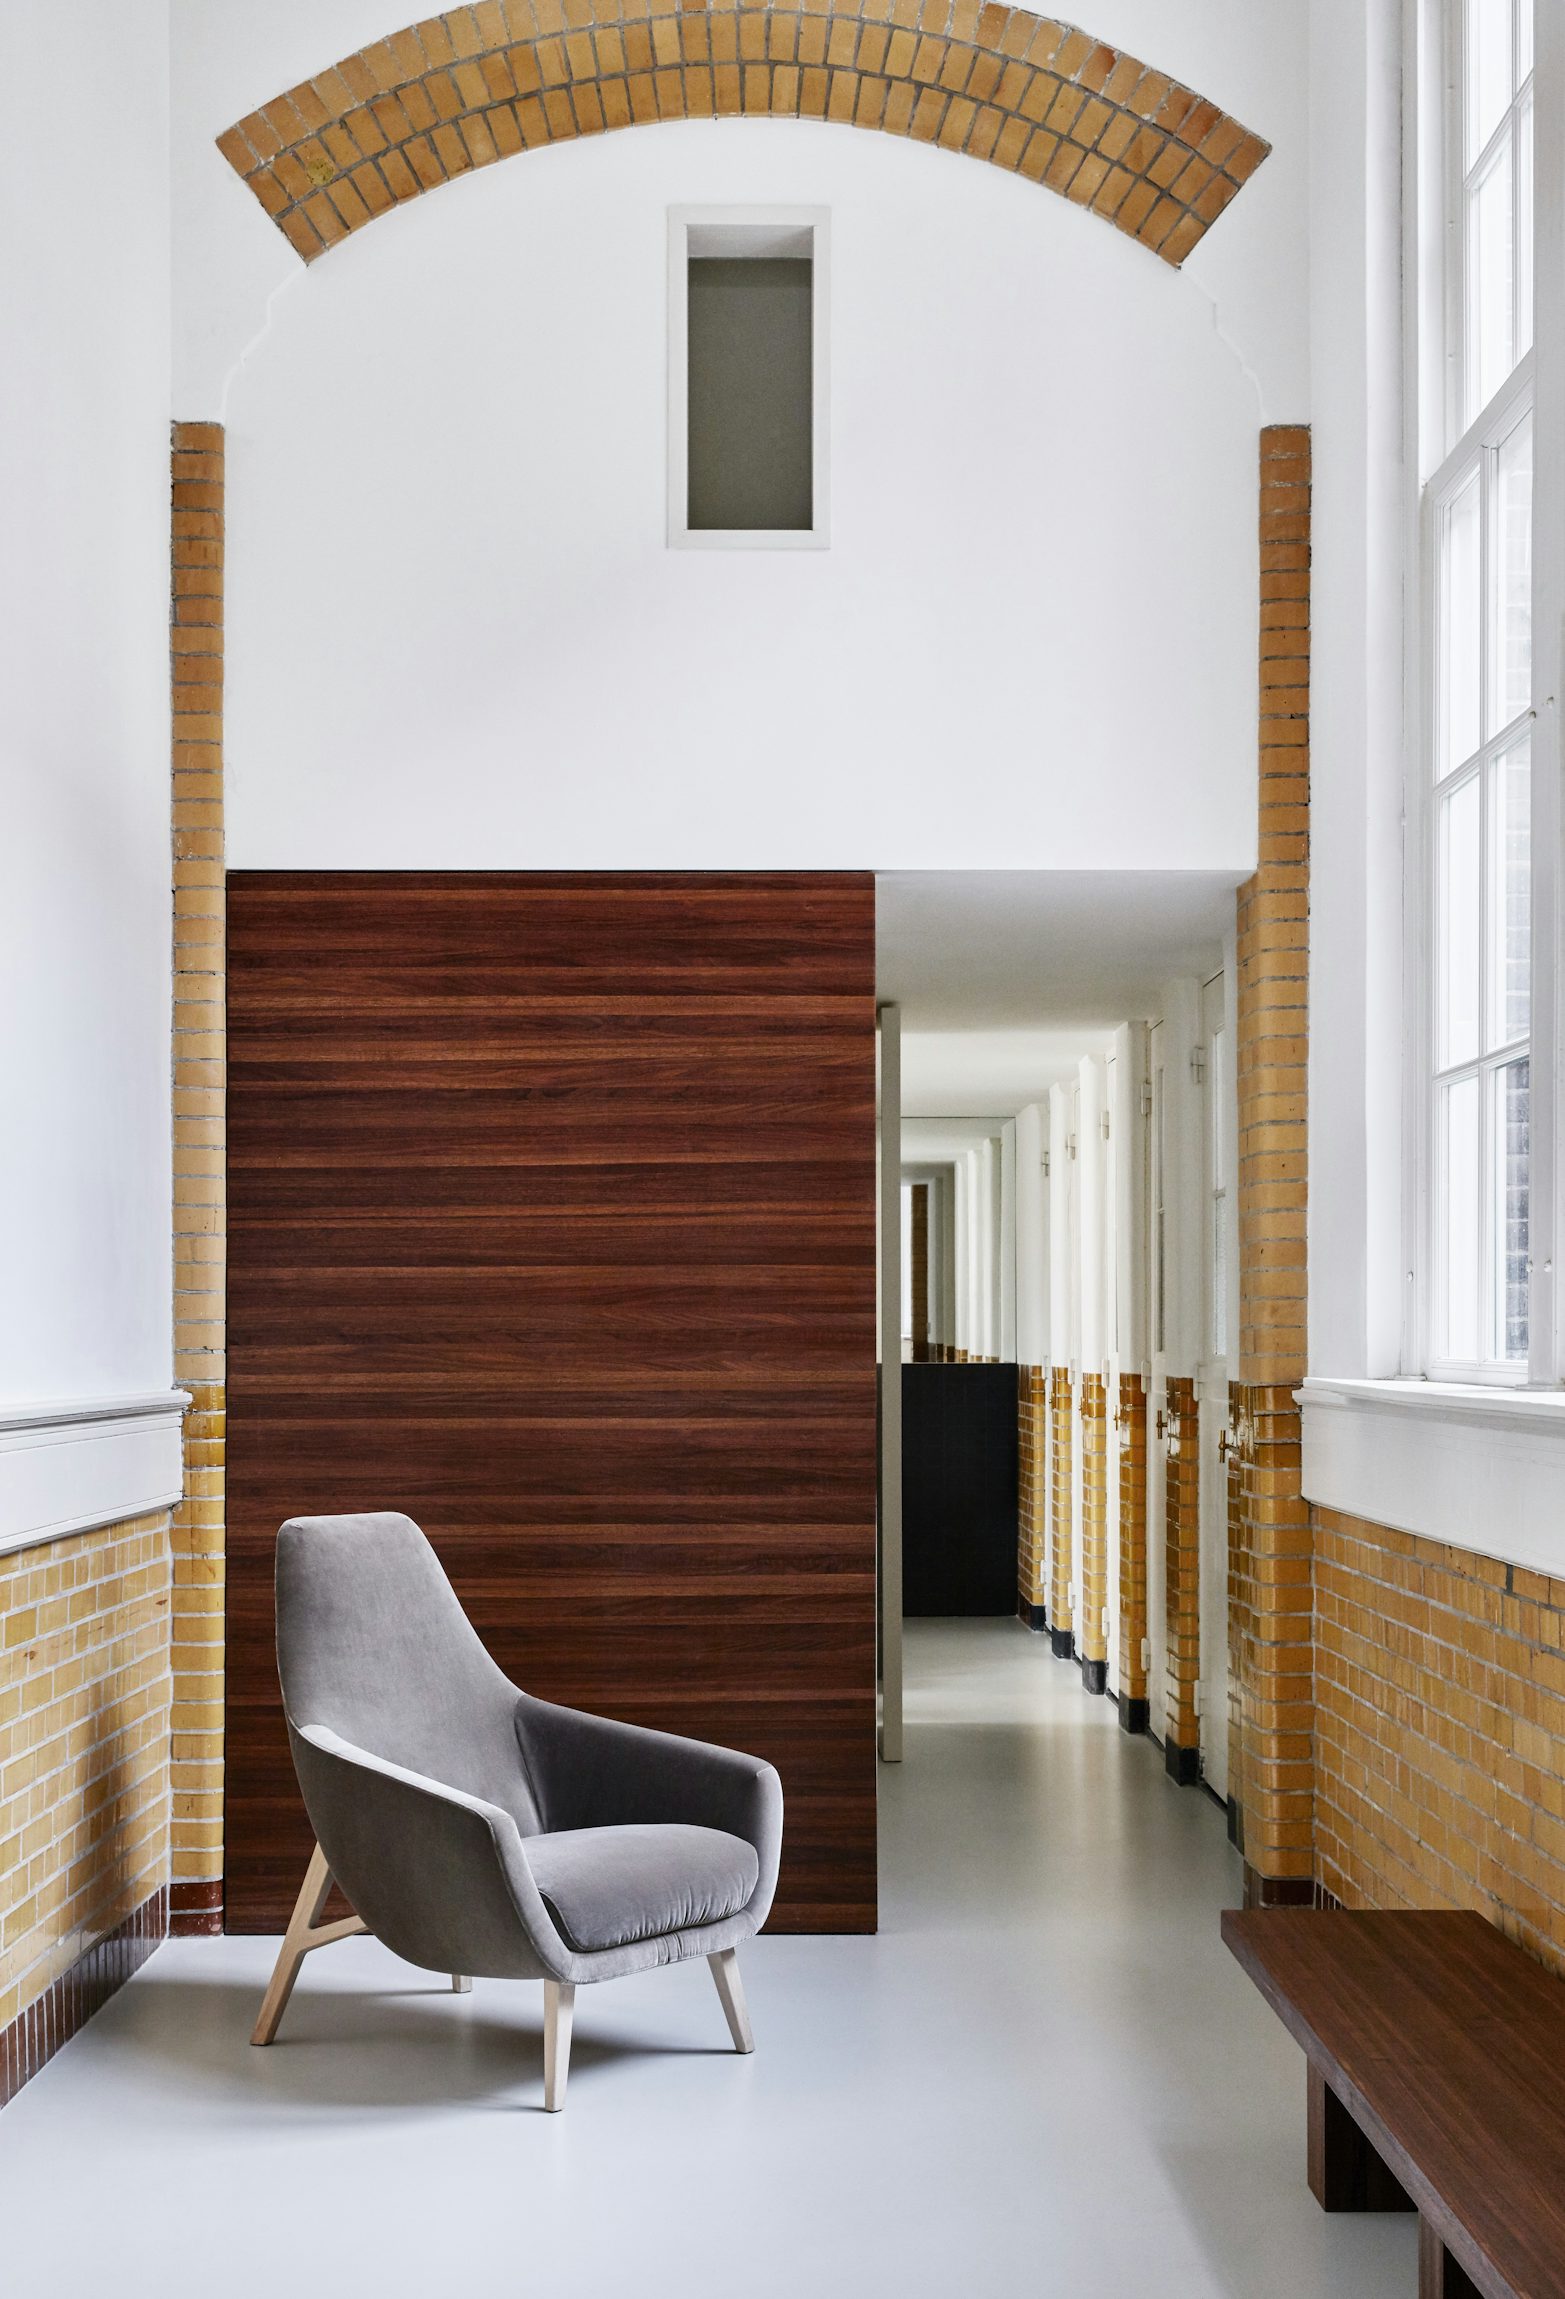 Enzo Lounge Chair Geert Koster 1